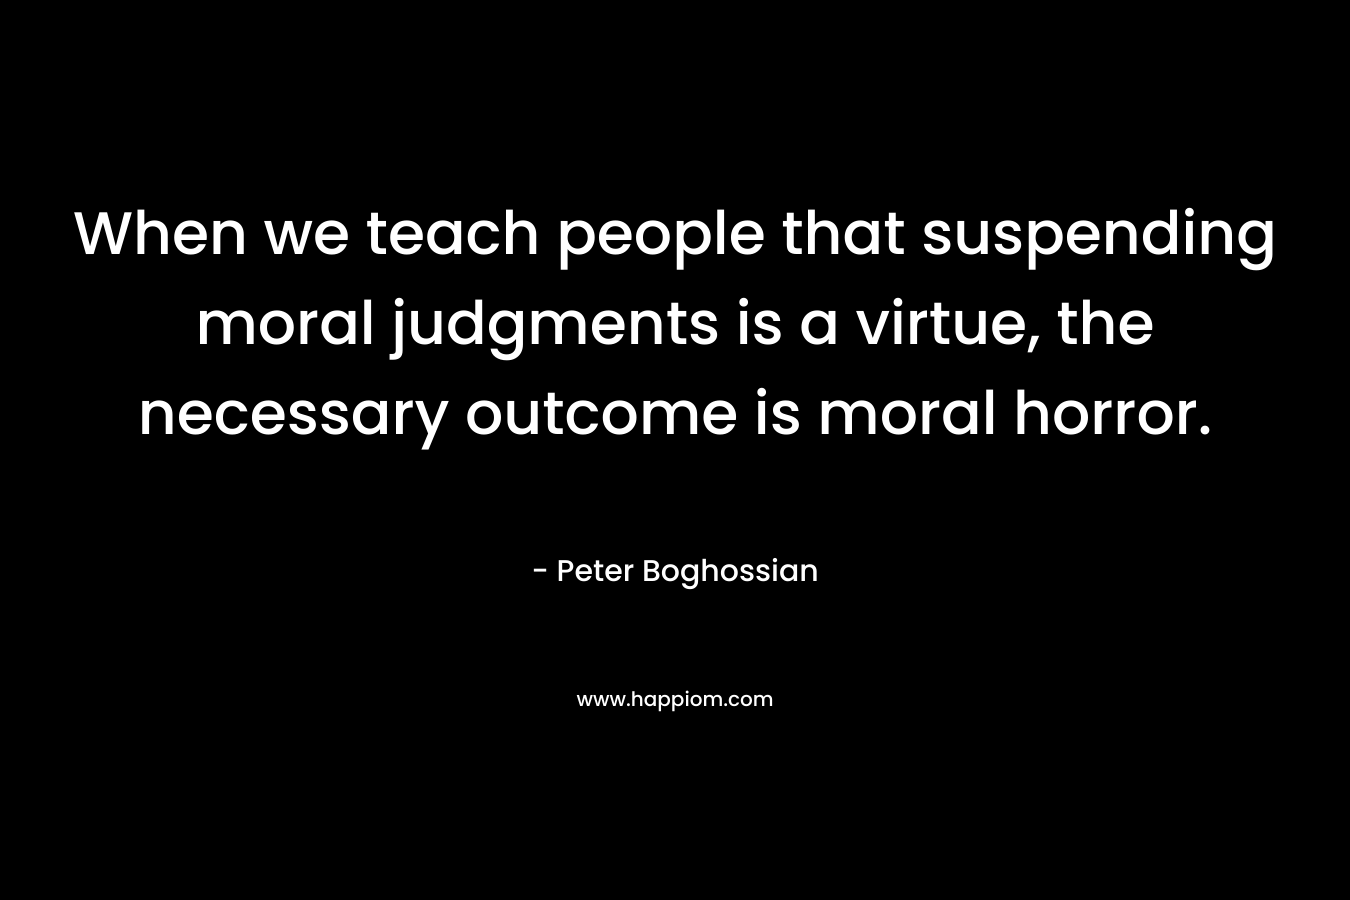 When we teach people that suspending moral judgments is a virtue, the necessary outcome is moral horror.